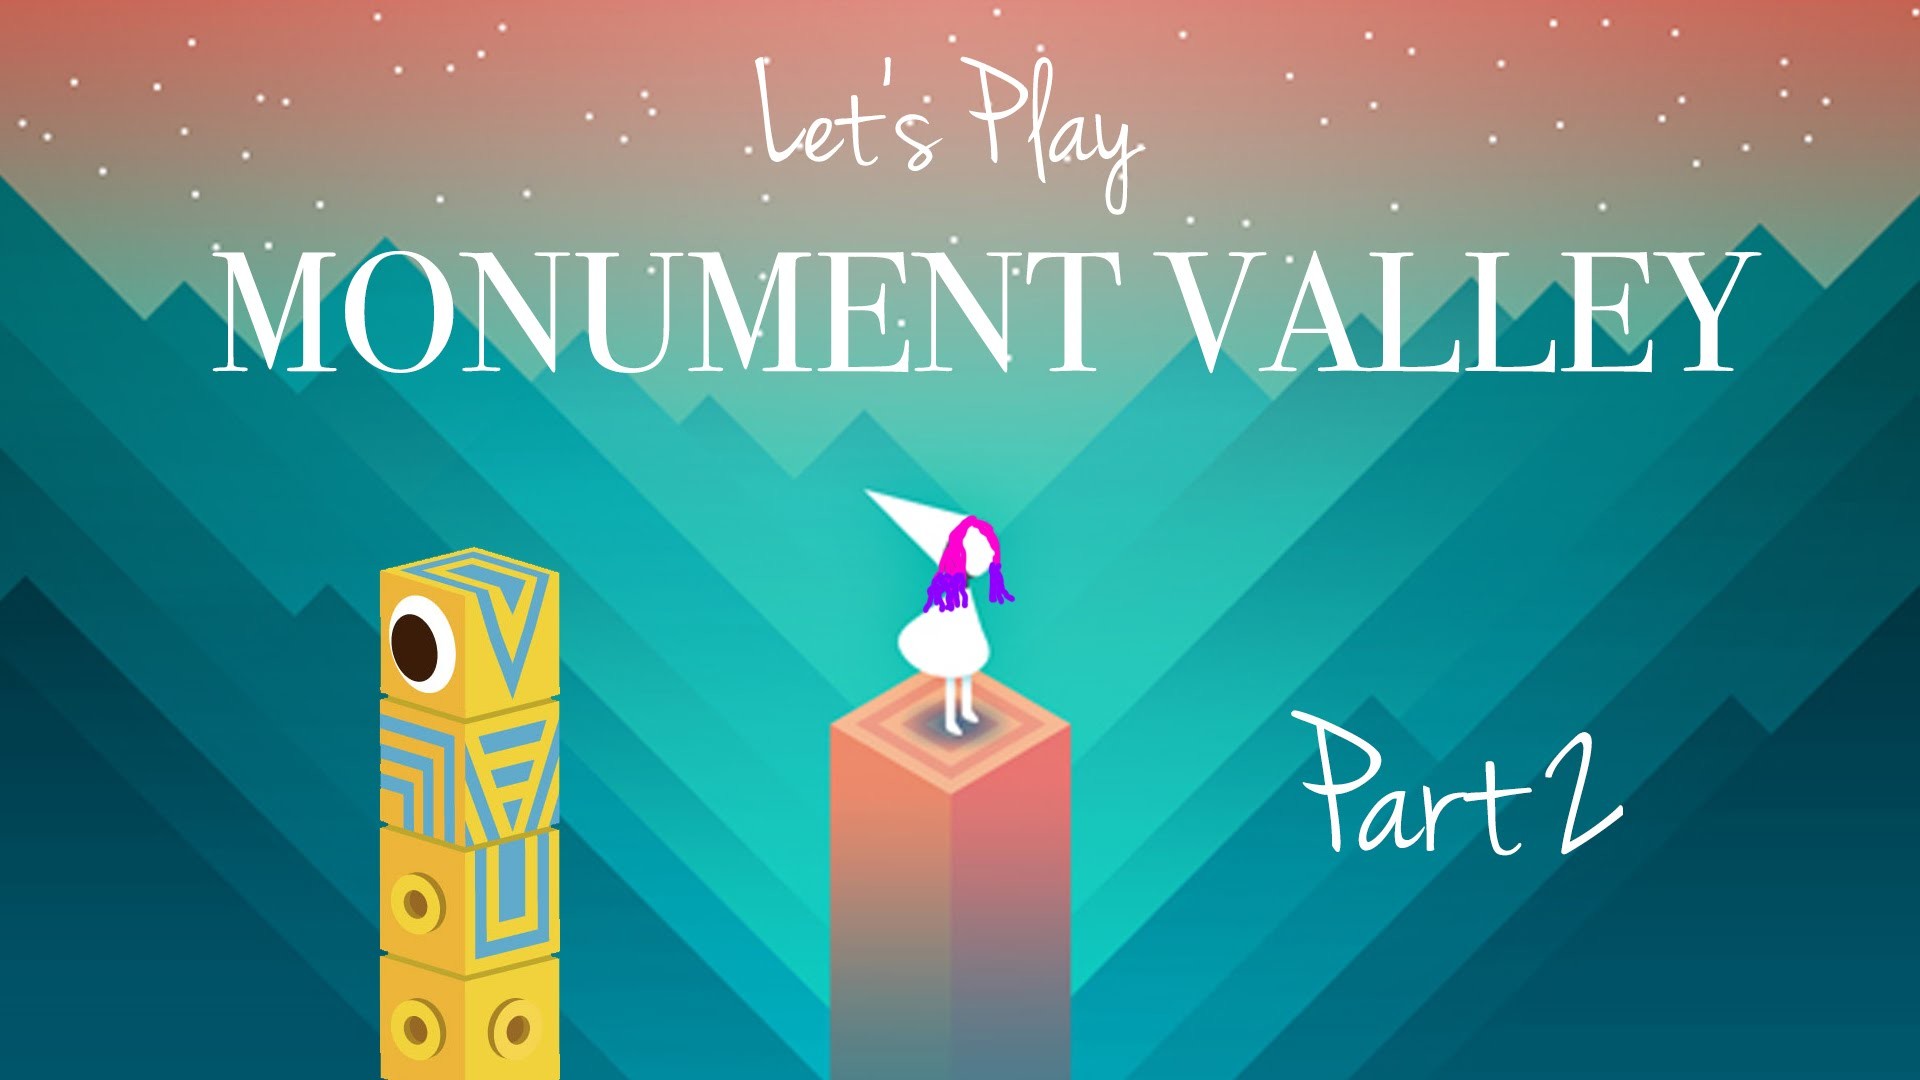 1920x1080 Let's Play #2: Monument Valley - OOOH FRIEND TOTEM FRIEND Ch 5-7